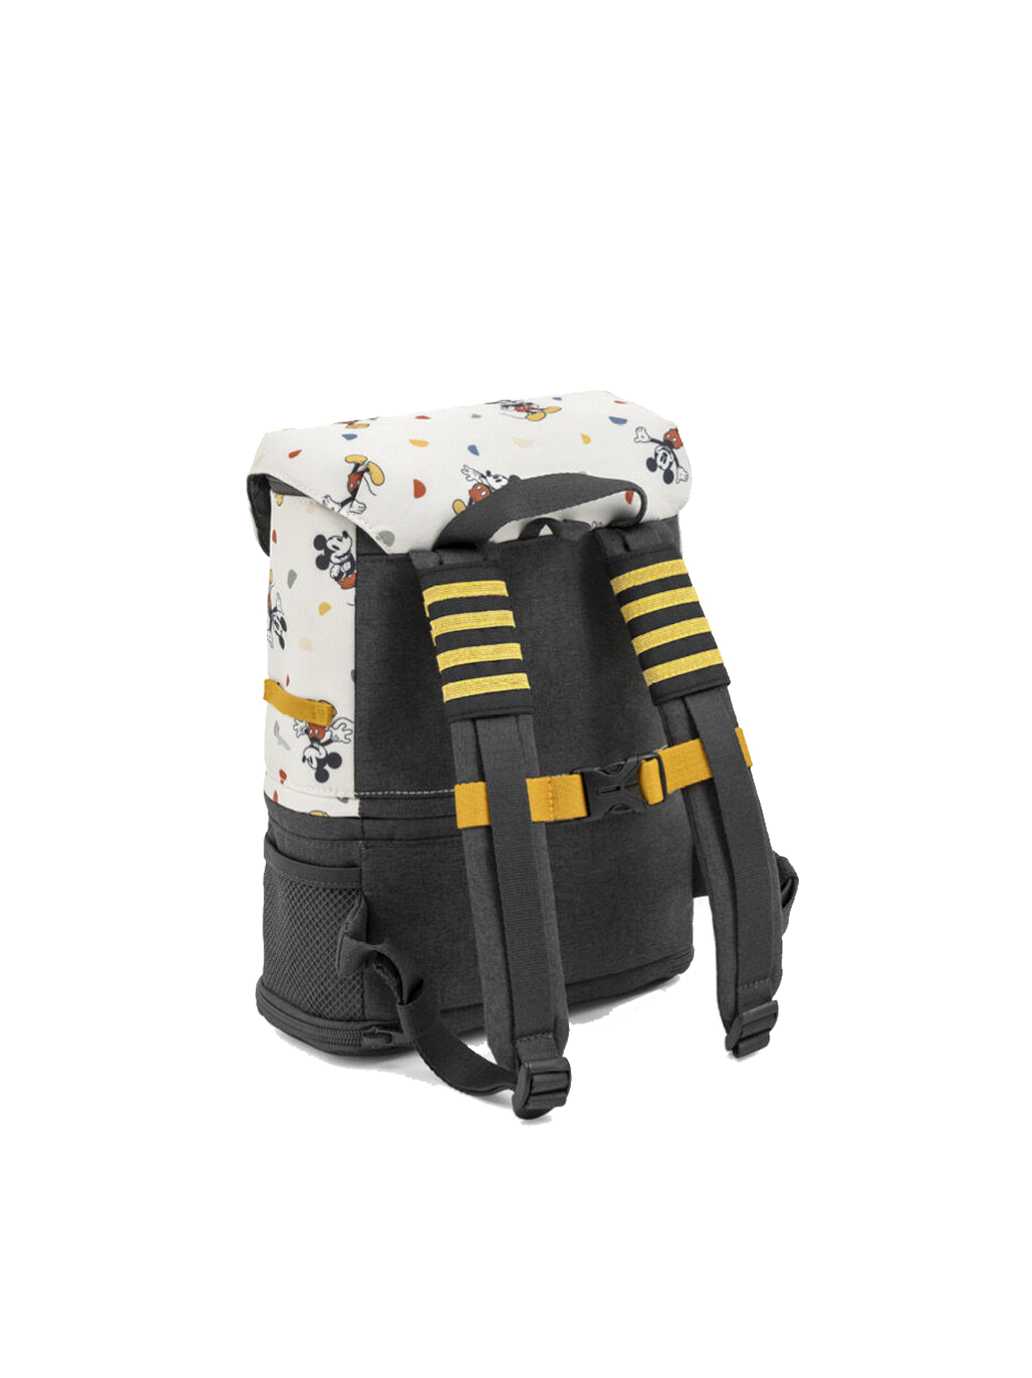 JetKids backpack